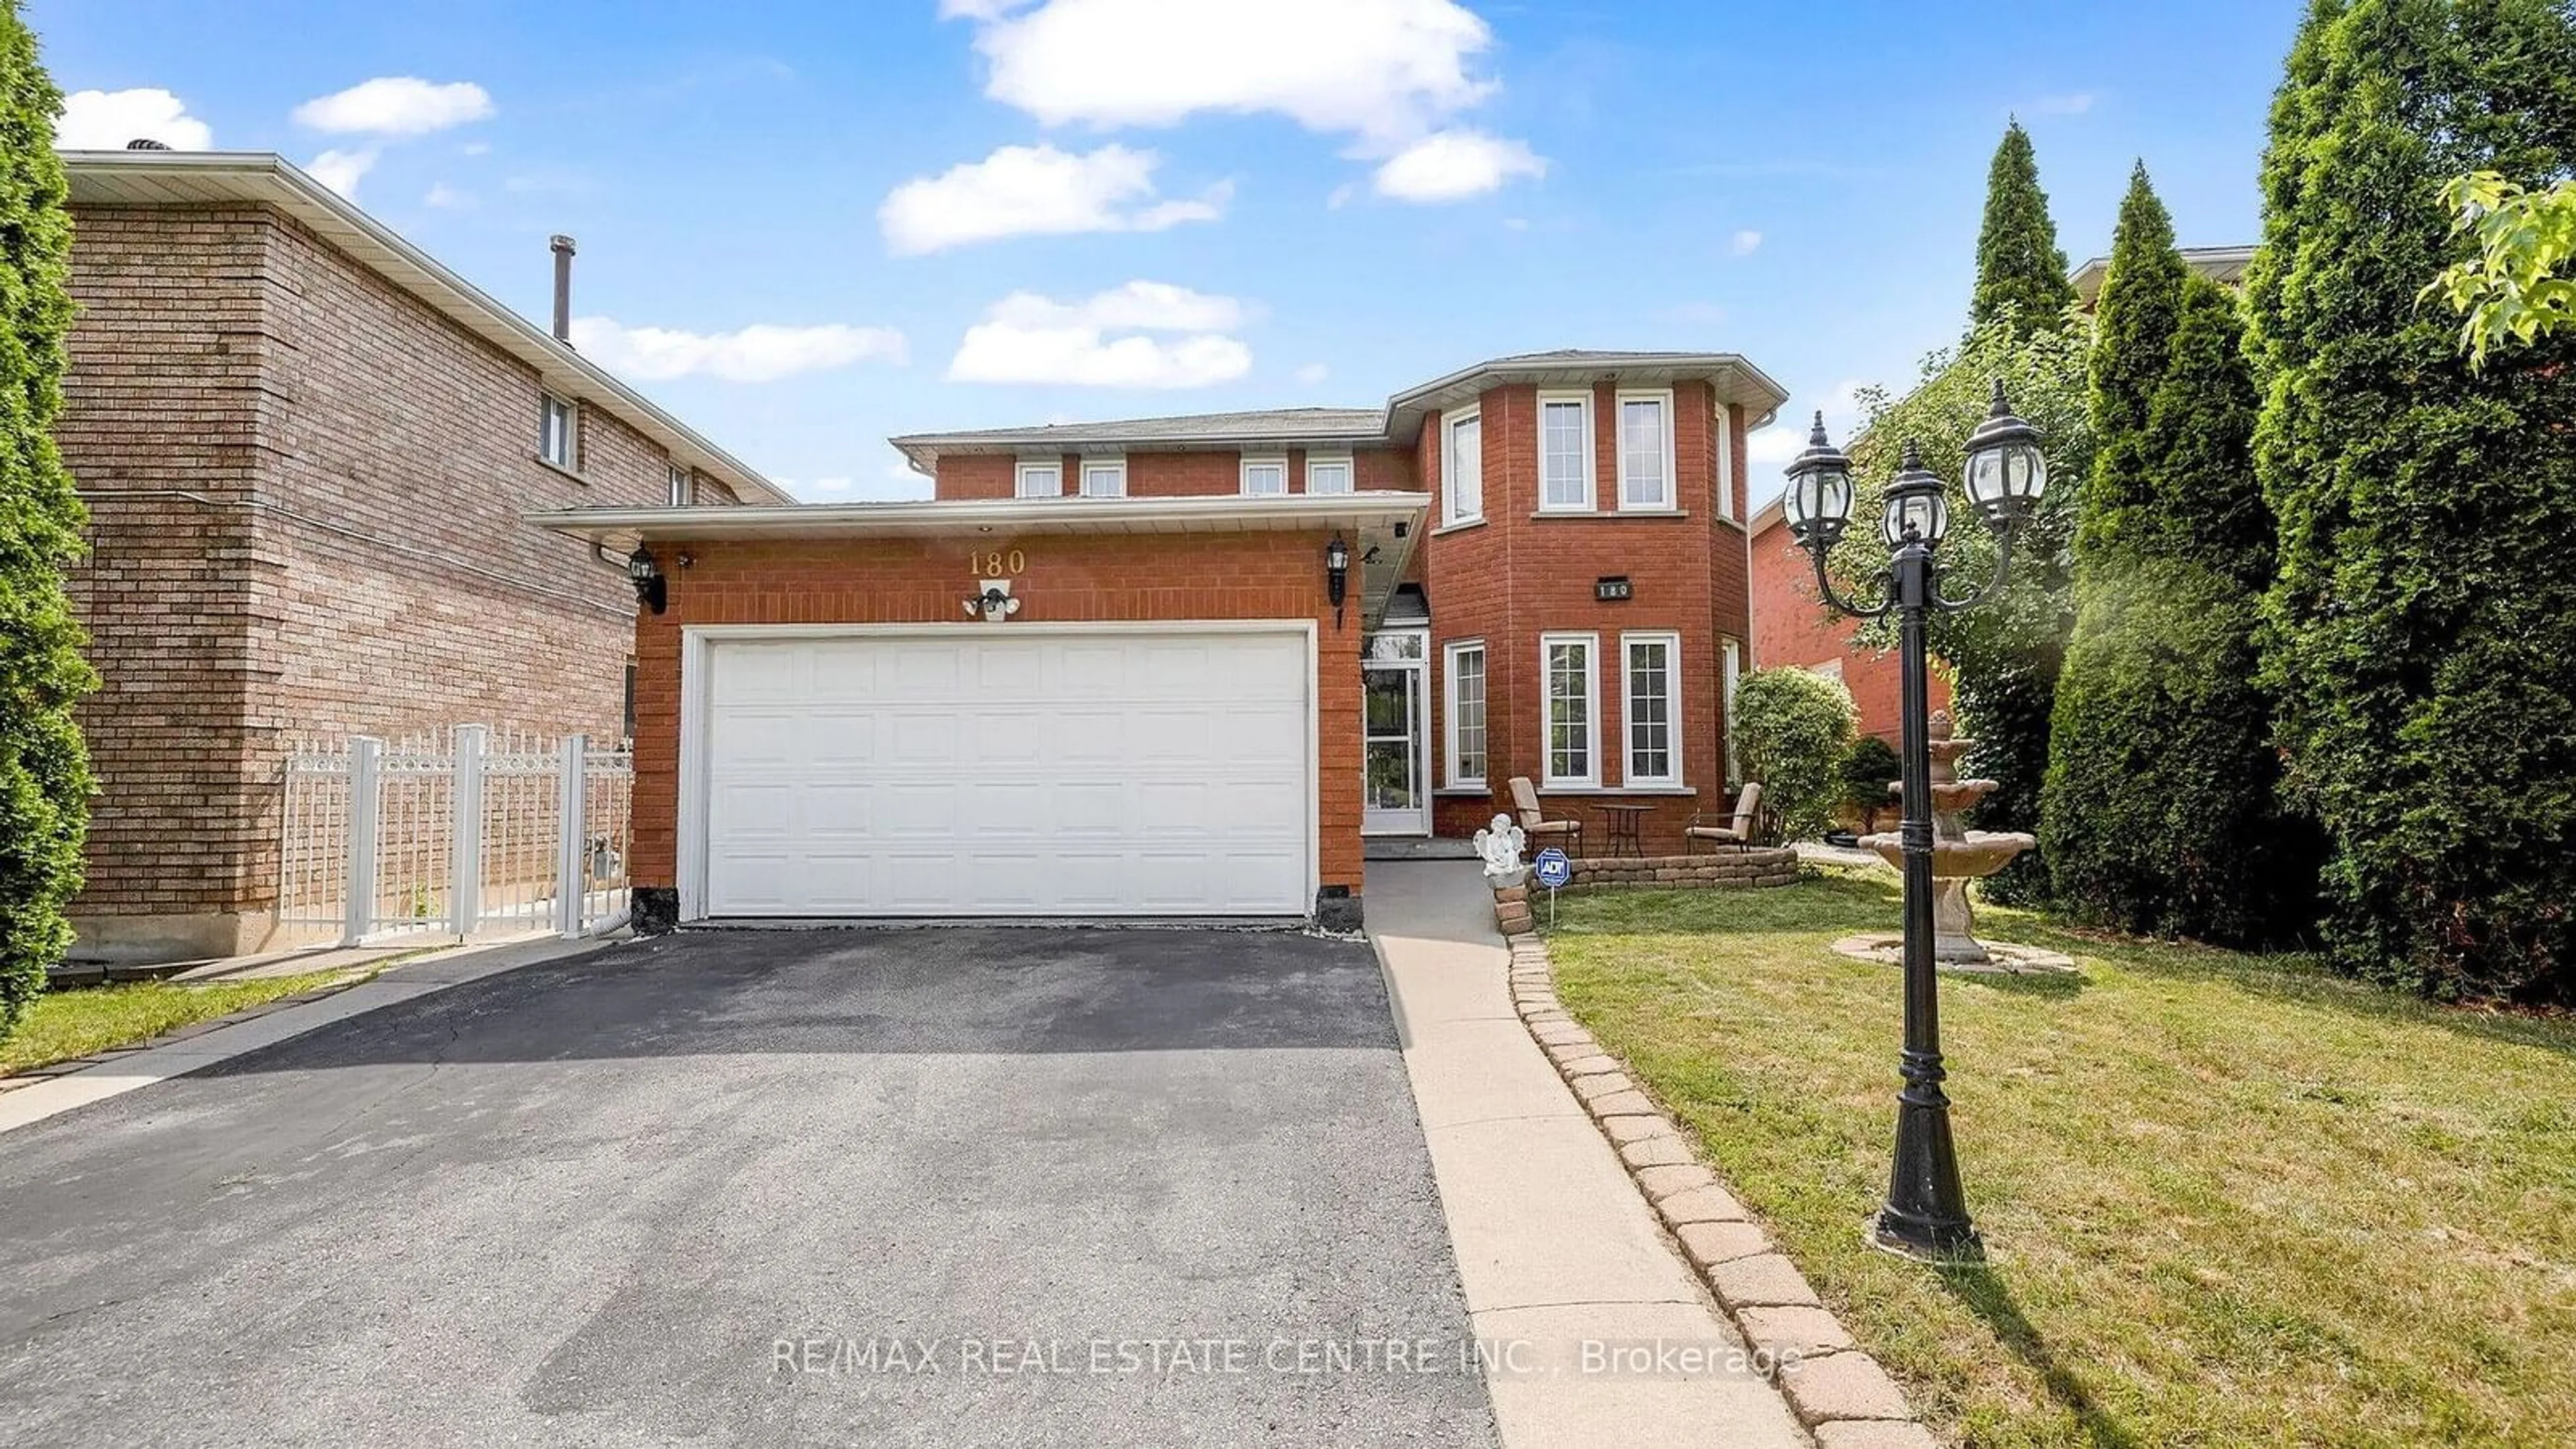 Frontside or backside of a home for 180 Kingknoll Dr, Brampton Ontario L6Y 4N2